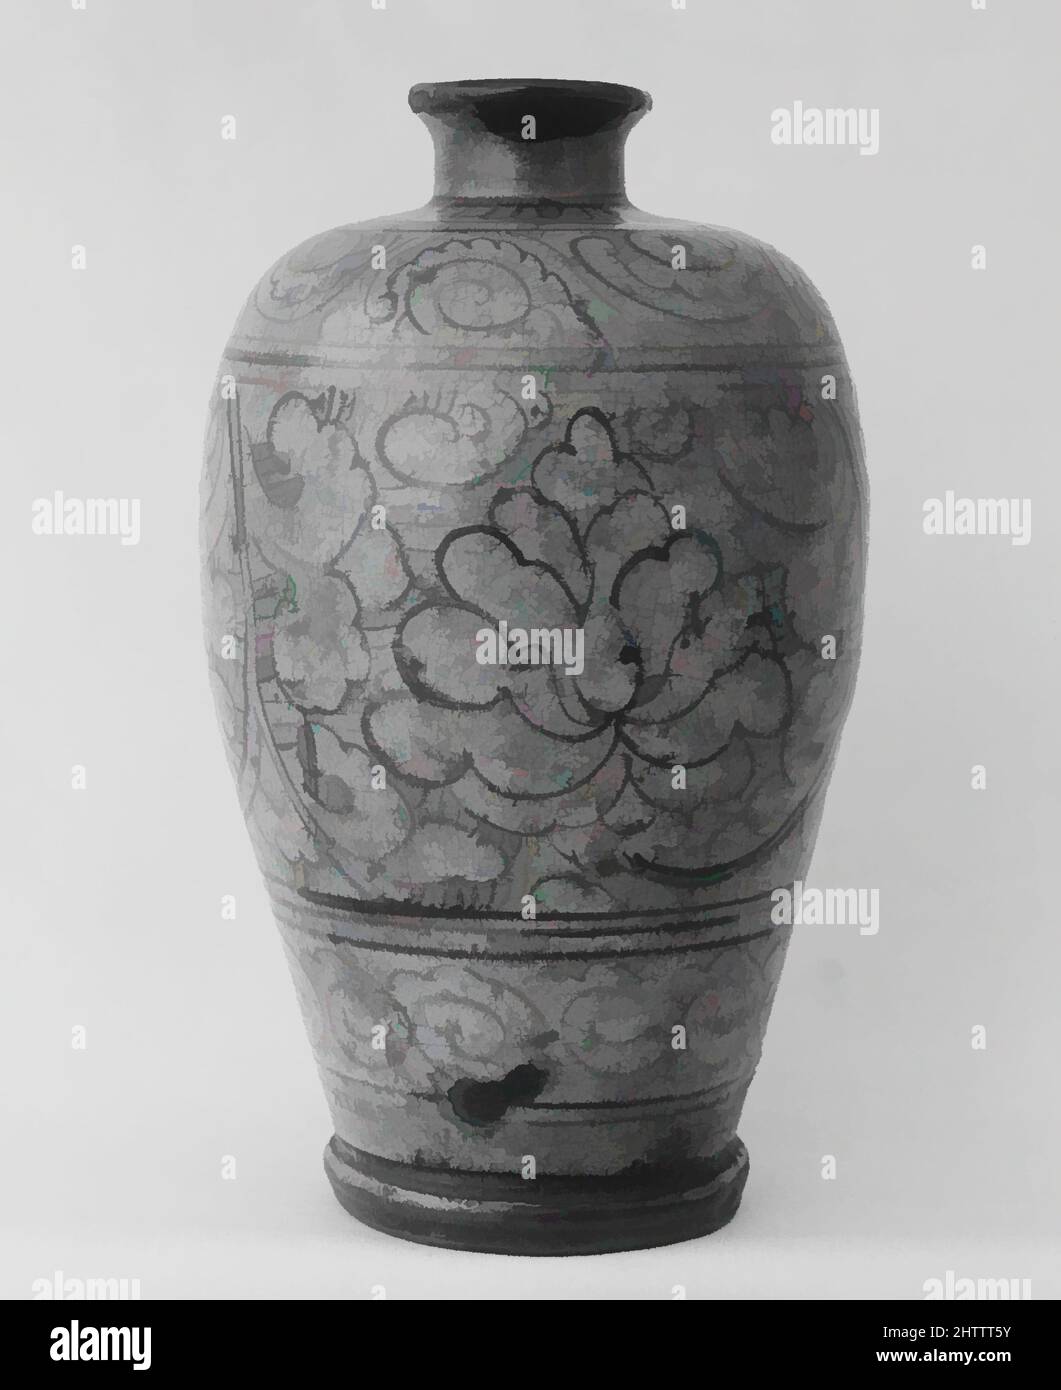 https://c8.alamy.com/comp/2HTTT5Y/art-inspired-by-vase-yuan-dynasty-12711368-china-stoneware-with-black-decoration-under-turquoise-glaze-cizhou-type-ware-h-8-in-203-cm-ceramics-classic-works-modernized-by-artotop-with-a-splash-of-modernity-shapes-color-and-value-eye-catching-visual-impact-on-art-emotions-through-freedom-of-artworks-in-a-contemporary-way-a-timeless-message-pursuing-a-wildly-creative-new-direction-artists-turning-to-the-digital-medium-and-creating-the-artotop-nft-2HTTT5Y.jpg